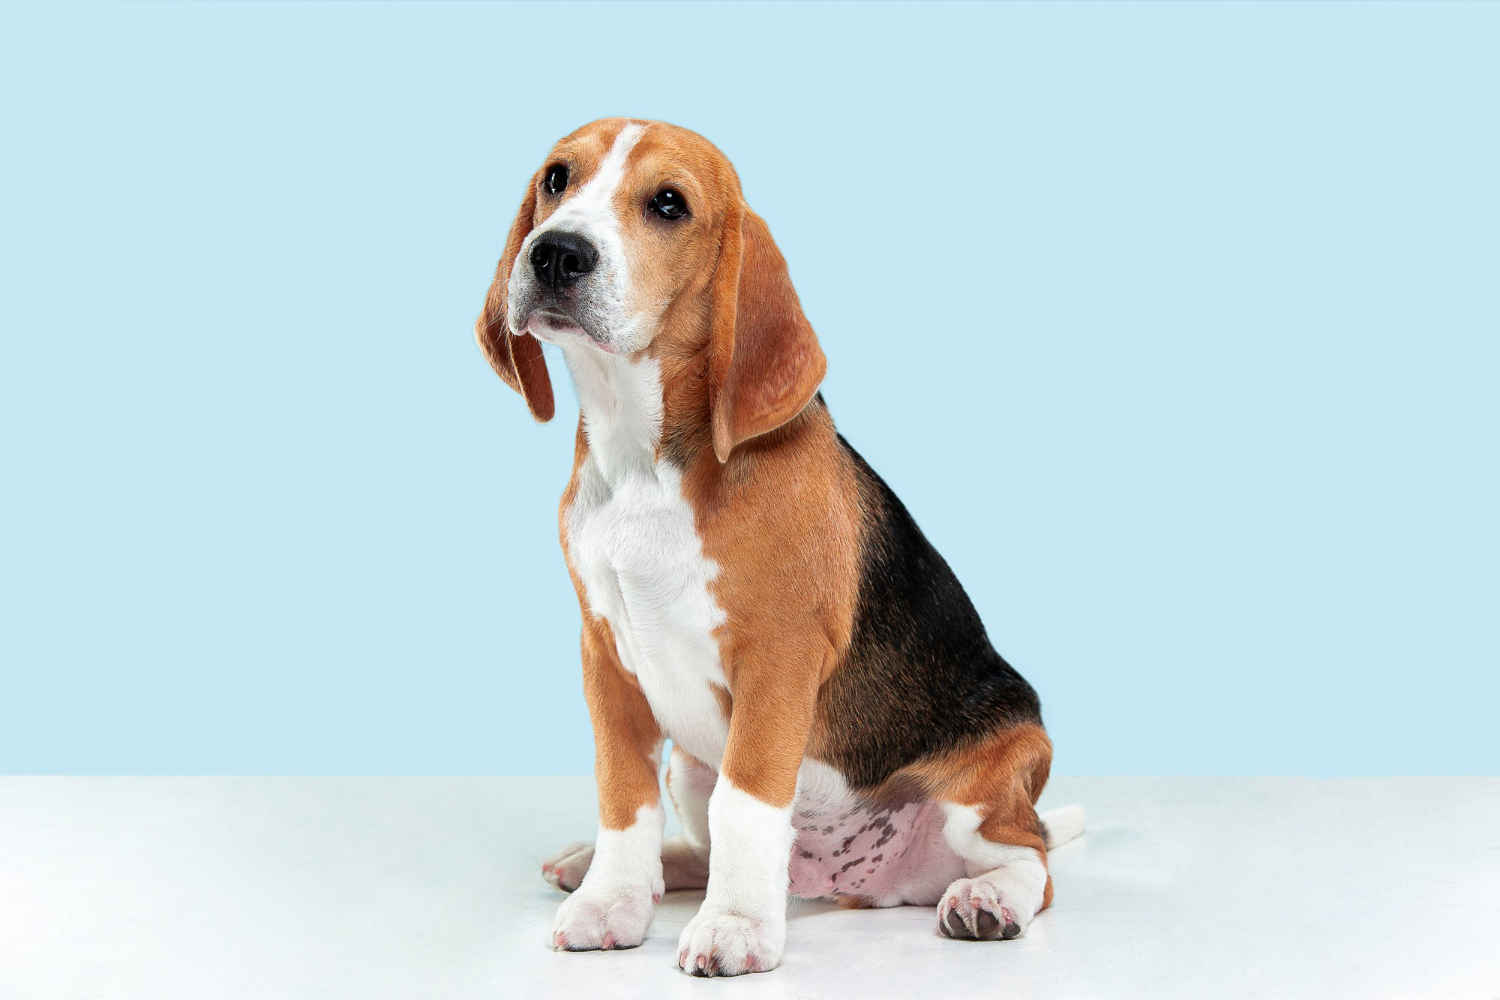 10 Tips for Keeping Your Beagle at a Healthy Weight